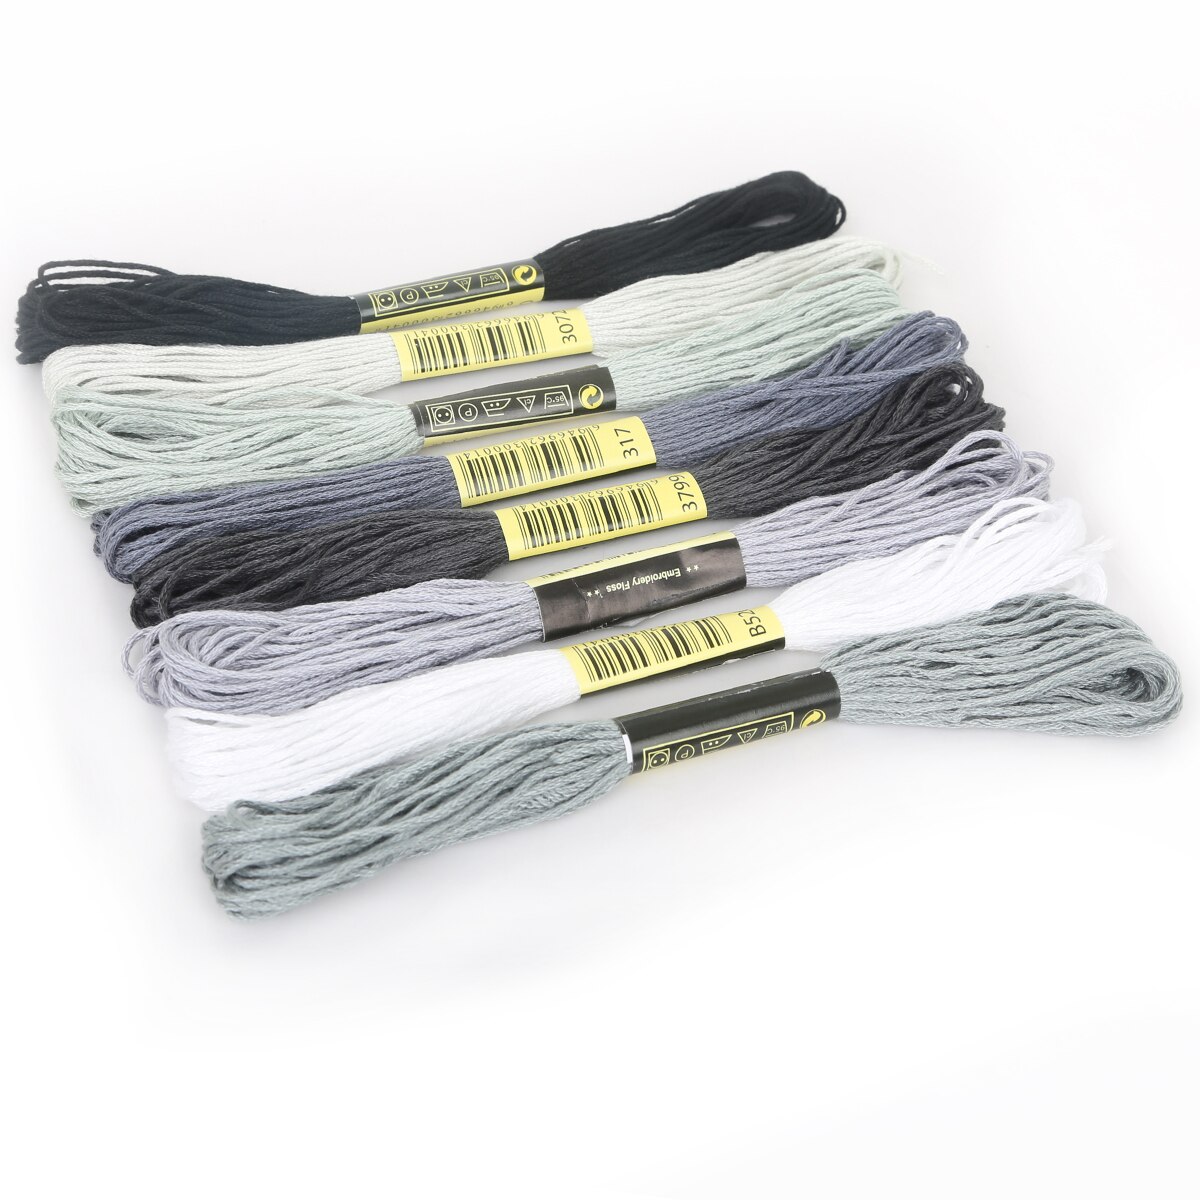 8pcs / bag per small bar 7.5m and Color cross stitch thread DIY clothing sewing supplies and fabrics: Gray